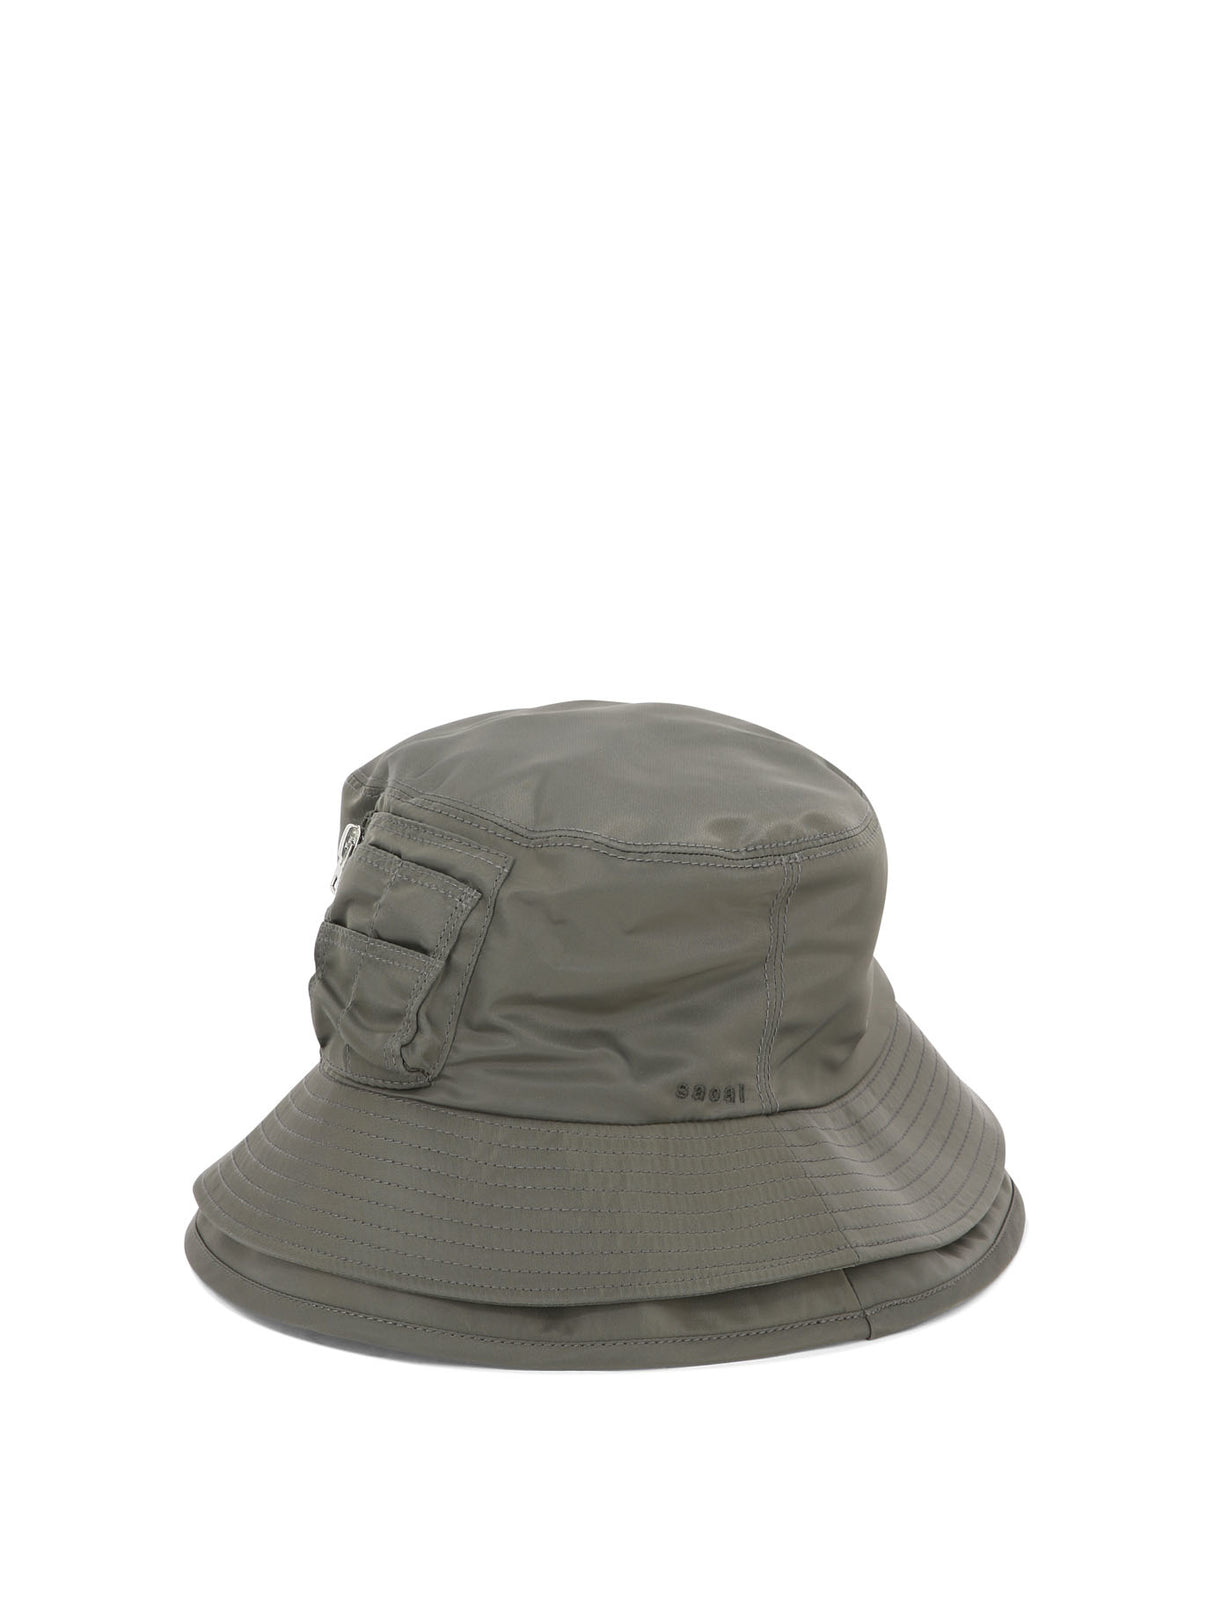 SACAI Green Double Brim Bucket Hat with Zippered Pocket and Embroidered Logo for Men